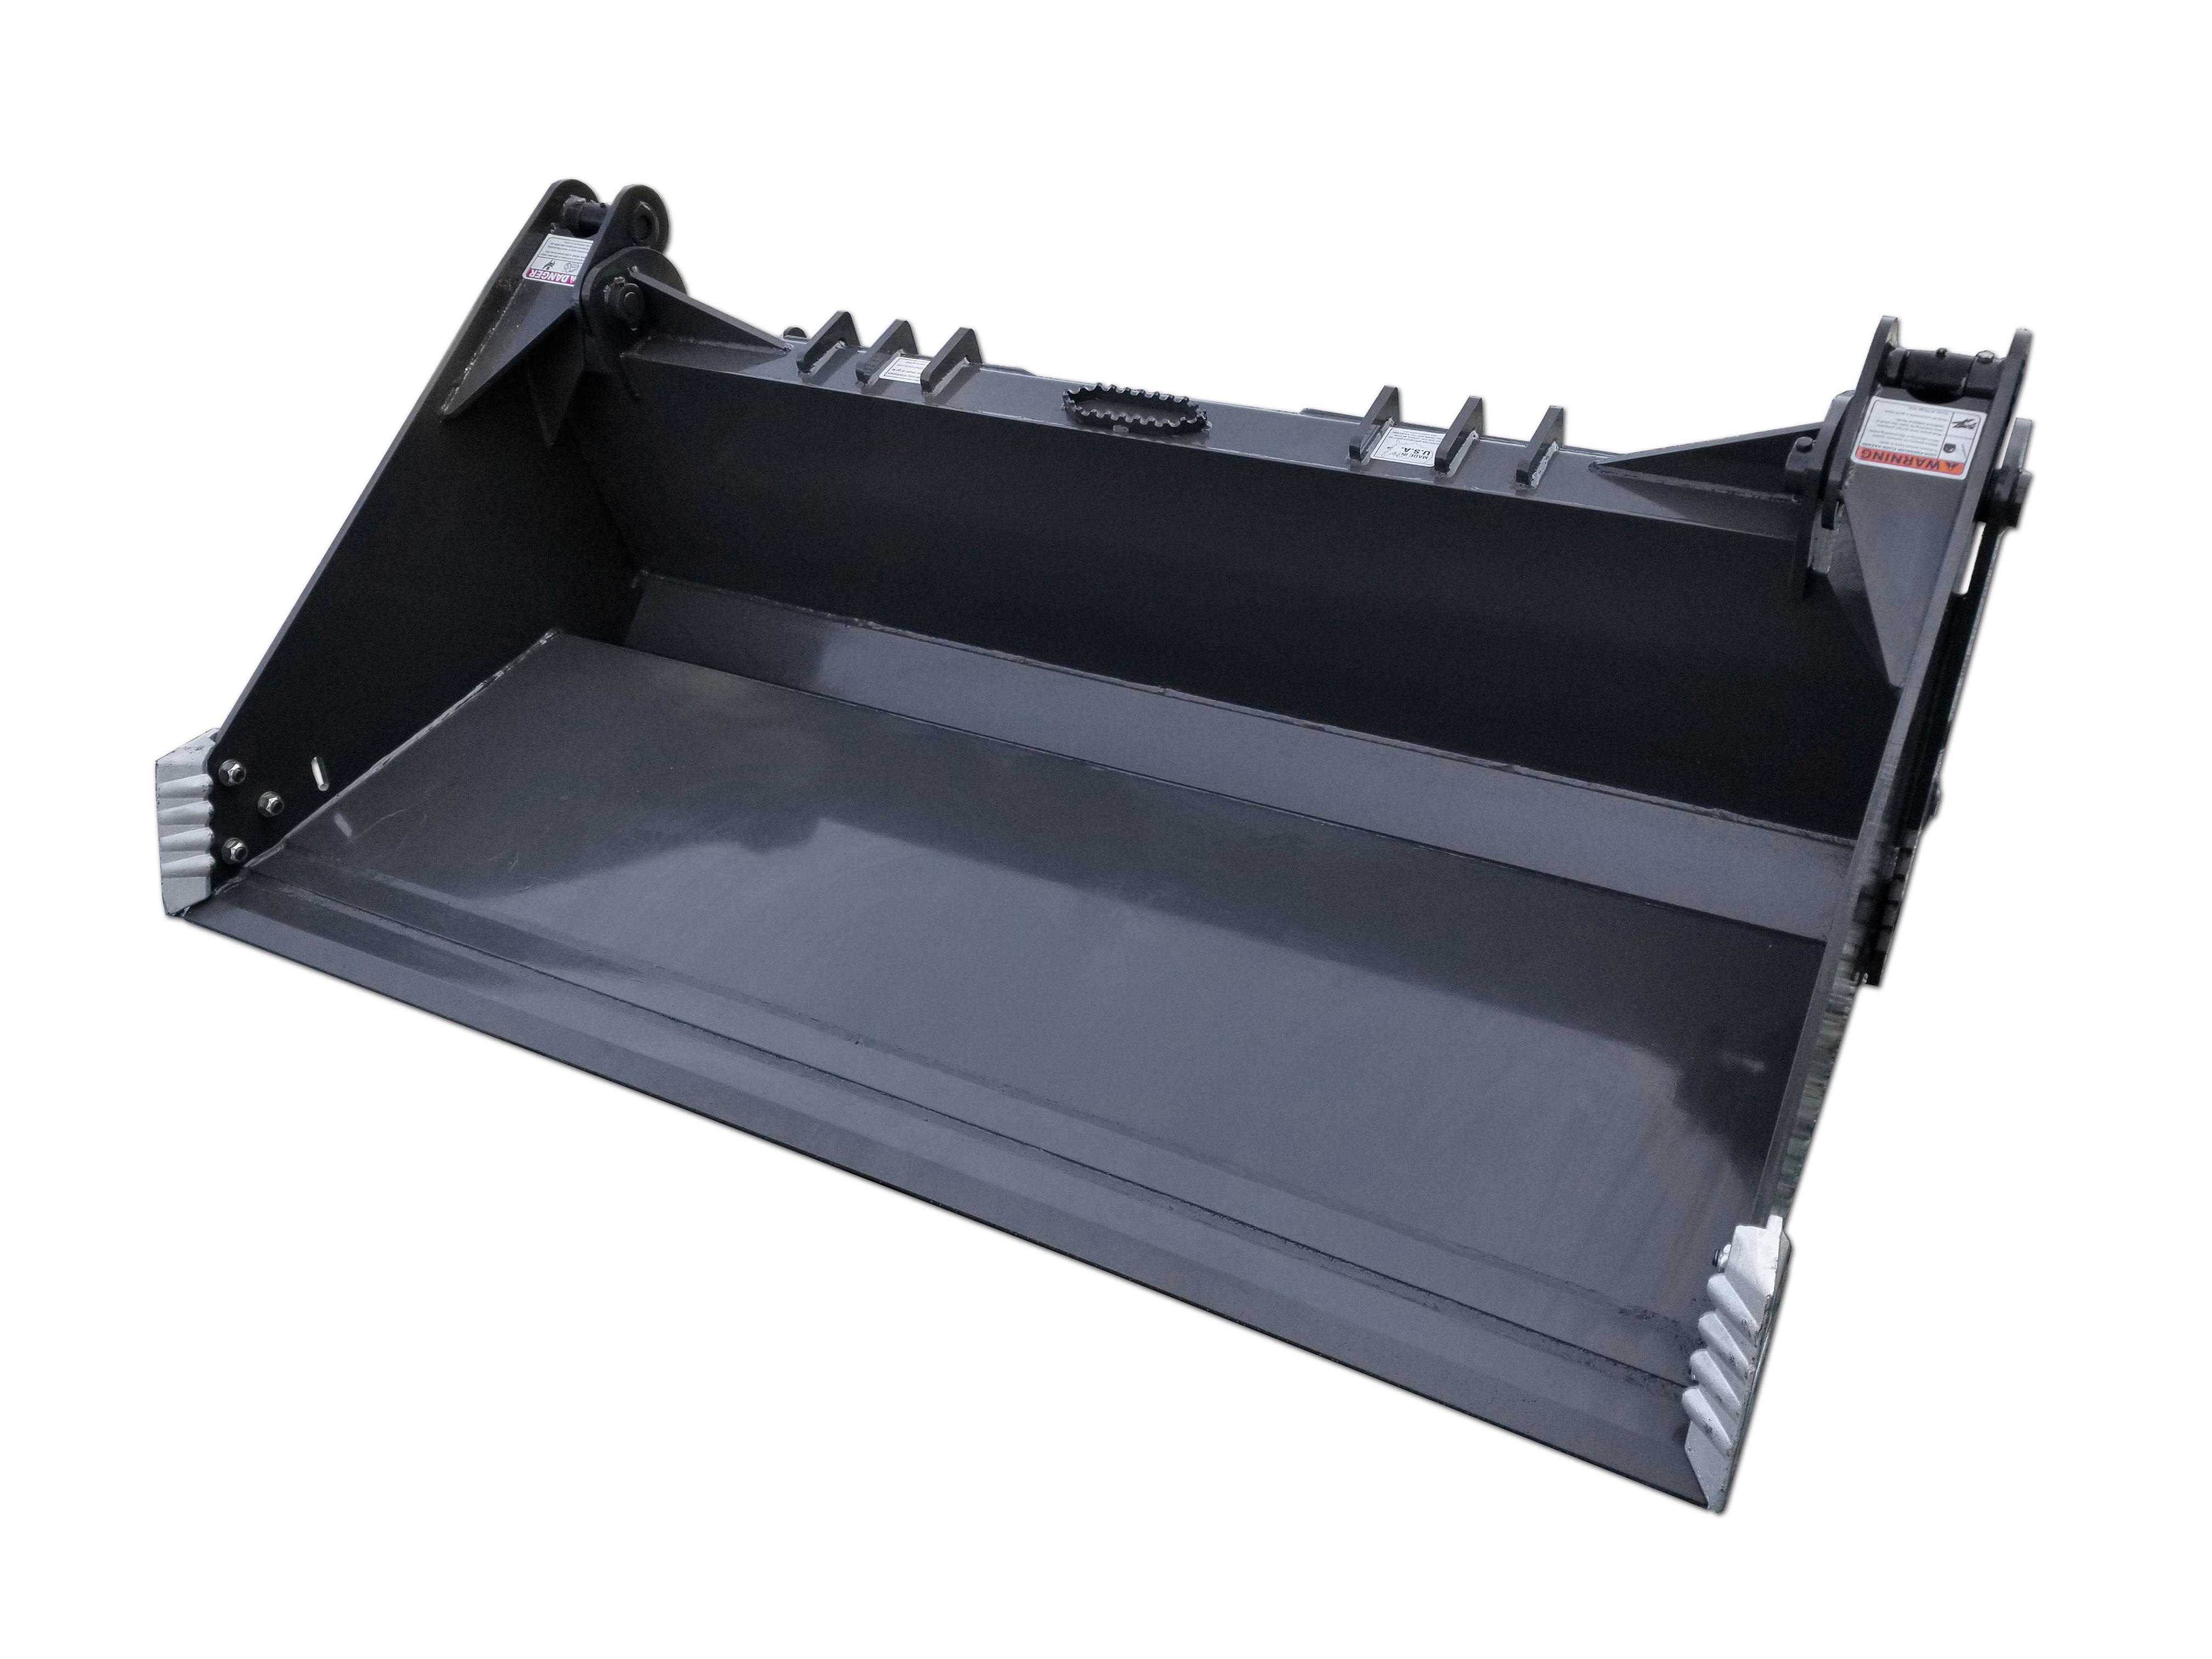 white background product photo of a cid skid steer 4-in-1 bucket attachment